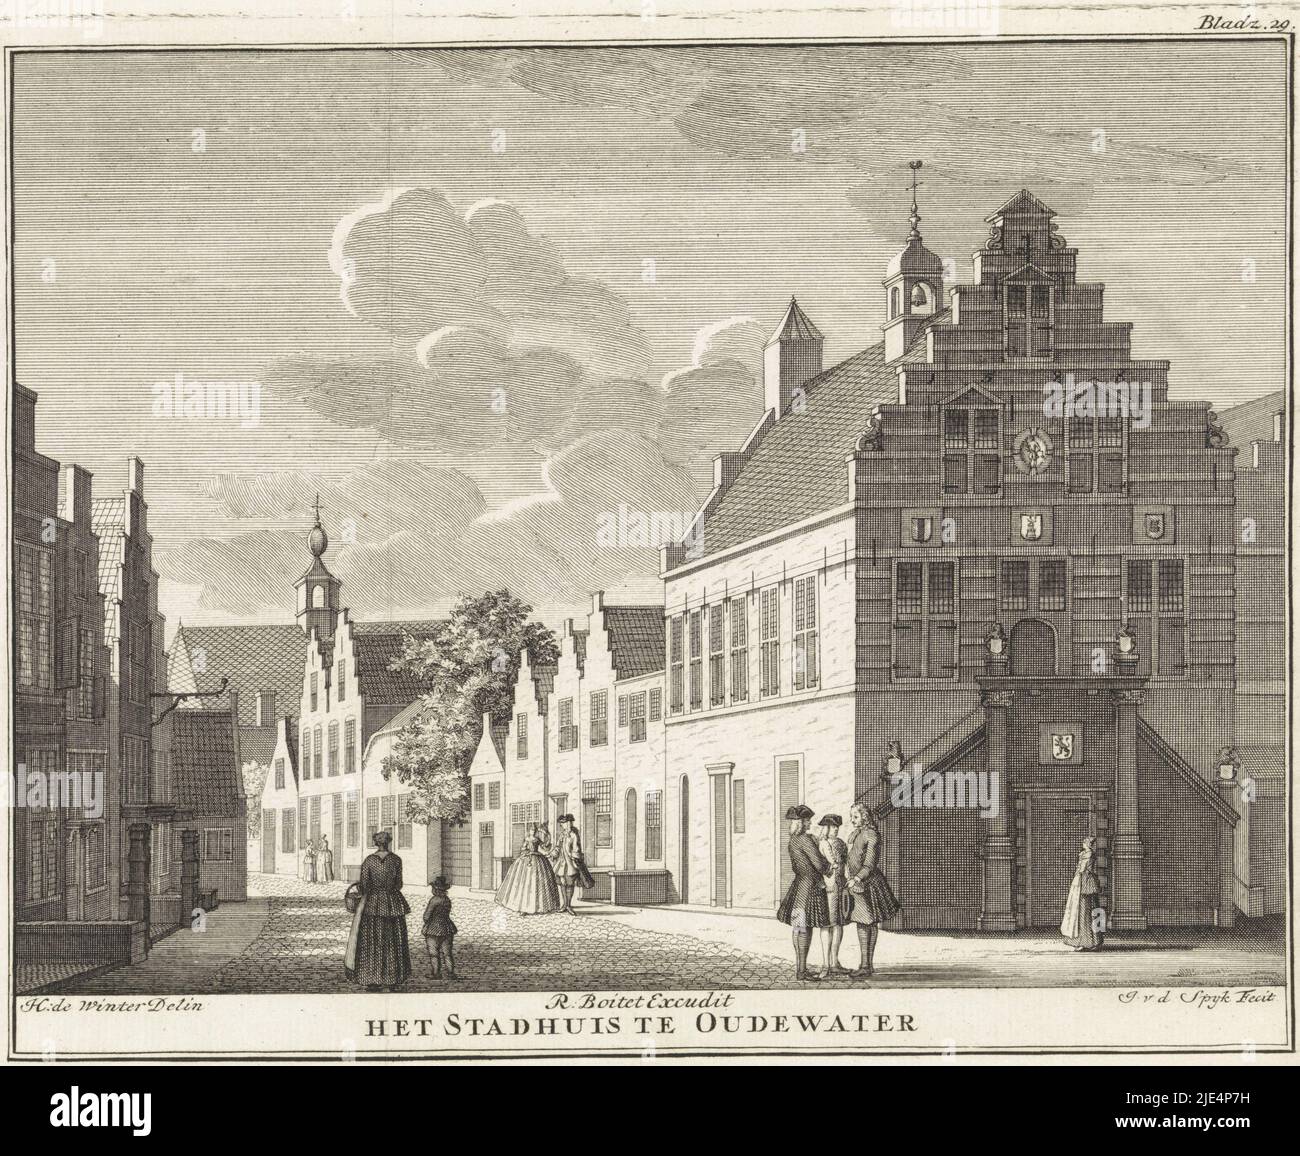 The town hall of Oudewater with left hand side view in a street, where a few people are walking, Town hall in Oudewater The town hall in Oudewater, print maker: Johannes van der Spyck, (mentioned on object), intermediary draughtsman: Hendrik de Winter, (mentioned on object), publisher: Reinier Boitet, (mentioned on object), Delft, 1747, paper, etching, h 163 mm × w 204 mm Stock Photo